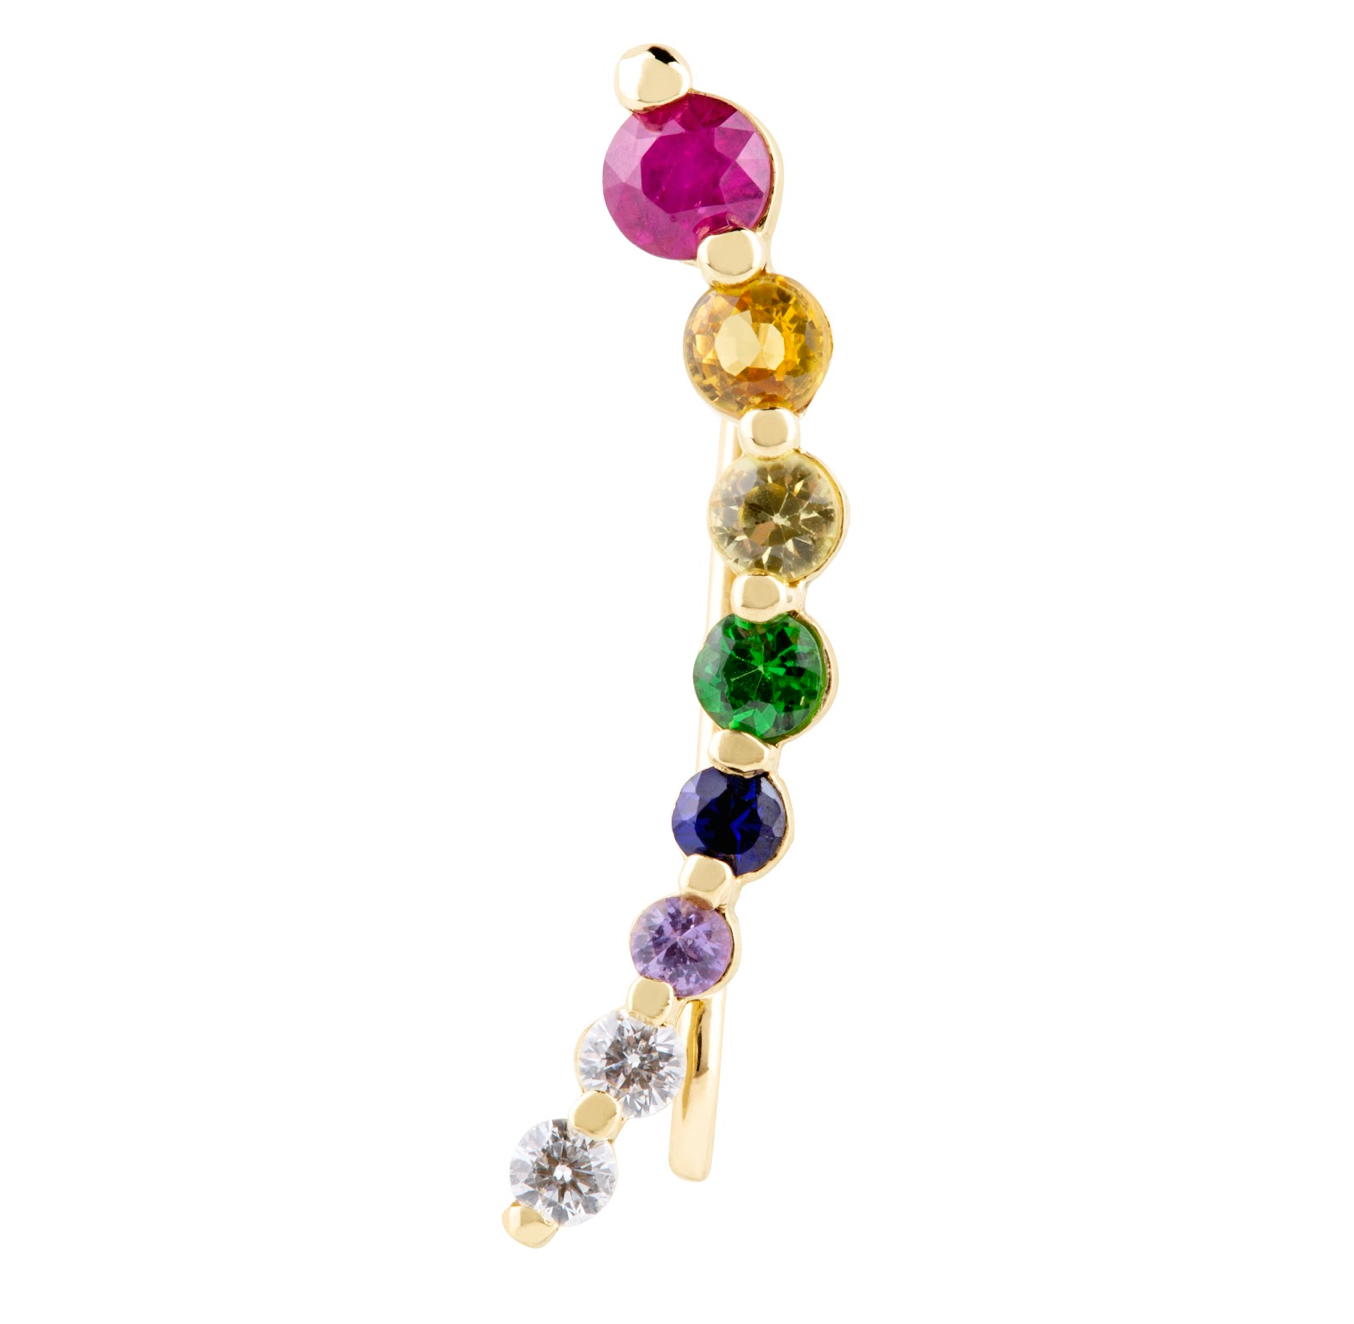 rainbow ear crawler can be worn on either the right side first piercing or wear it on your cartilage.   14K yellow gold ﻿sapphire/diamond: ruby, orange sapphire, yellow sapphire, tsavorite, sapphire, purple sapphire, diamond stone sizes 1.00mm-2.75mm  